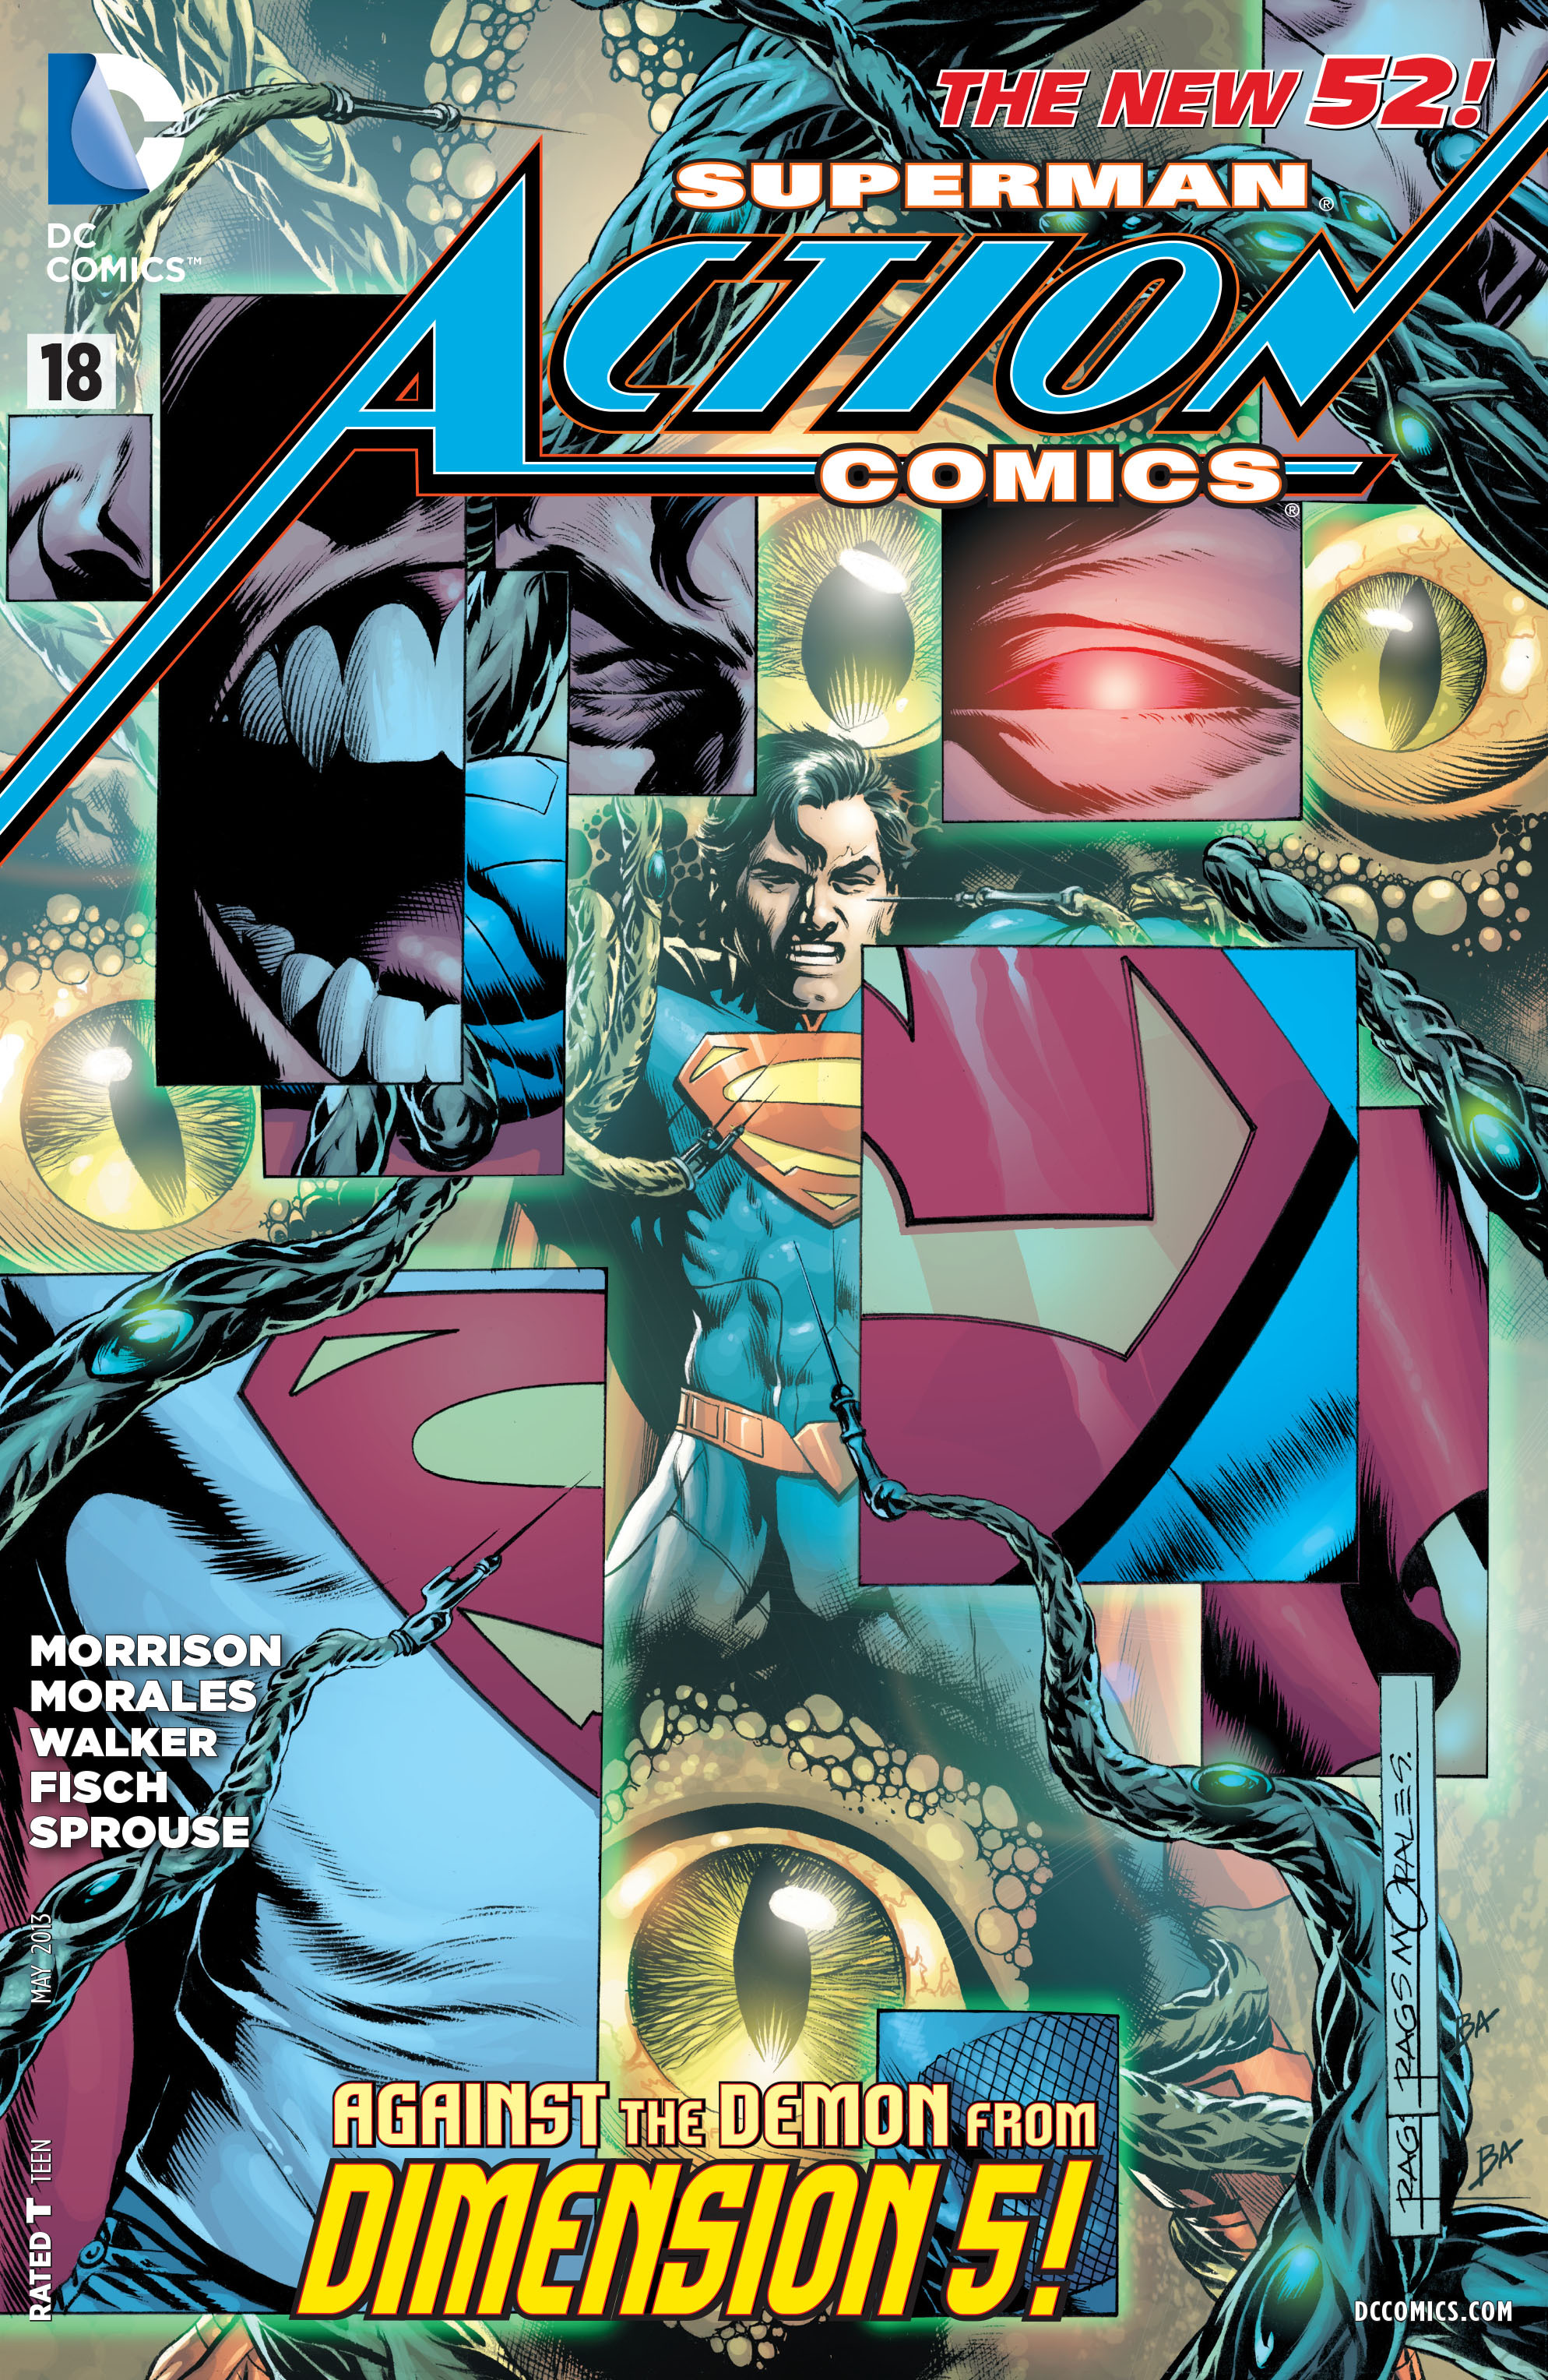 Action Comics Vol 2 18 | DC Database | FANDOM powered by Wikia1988 x 3056